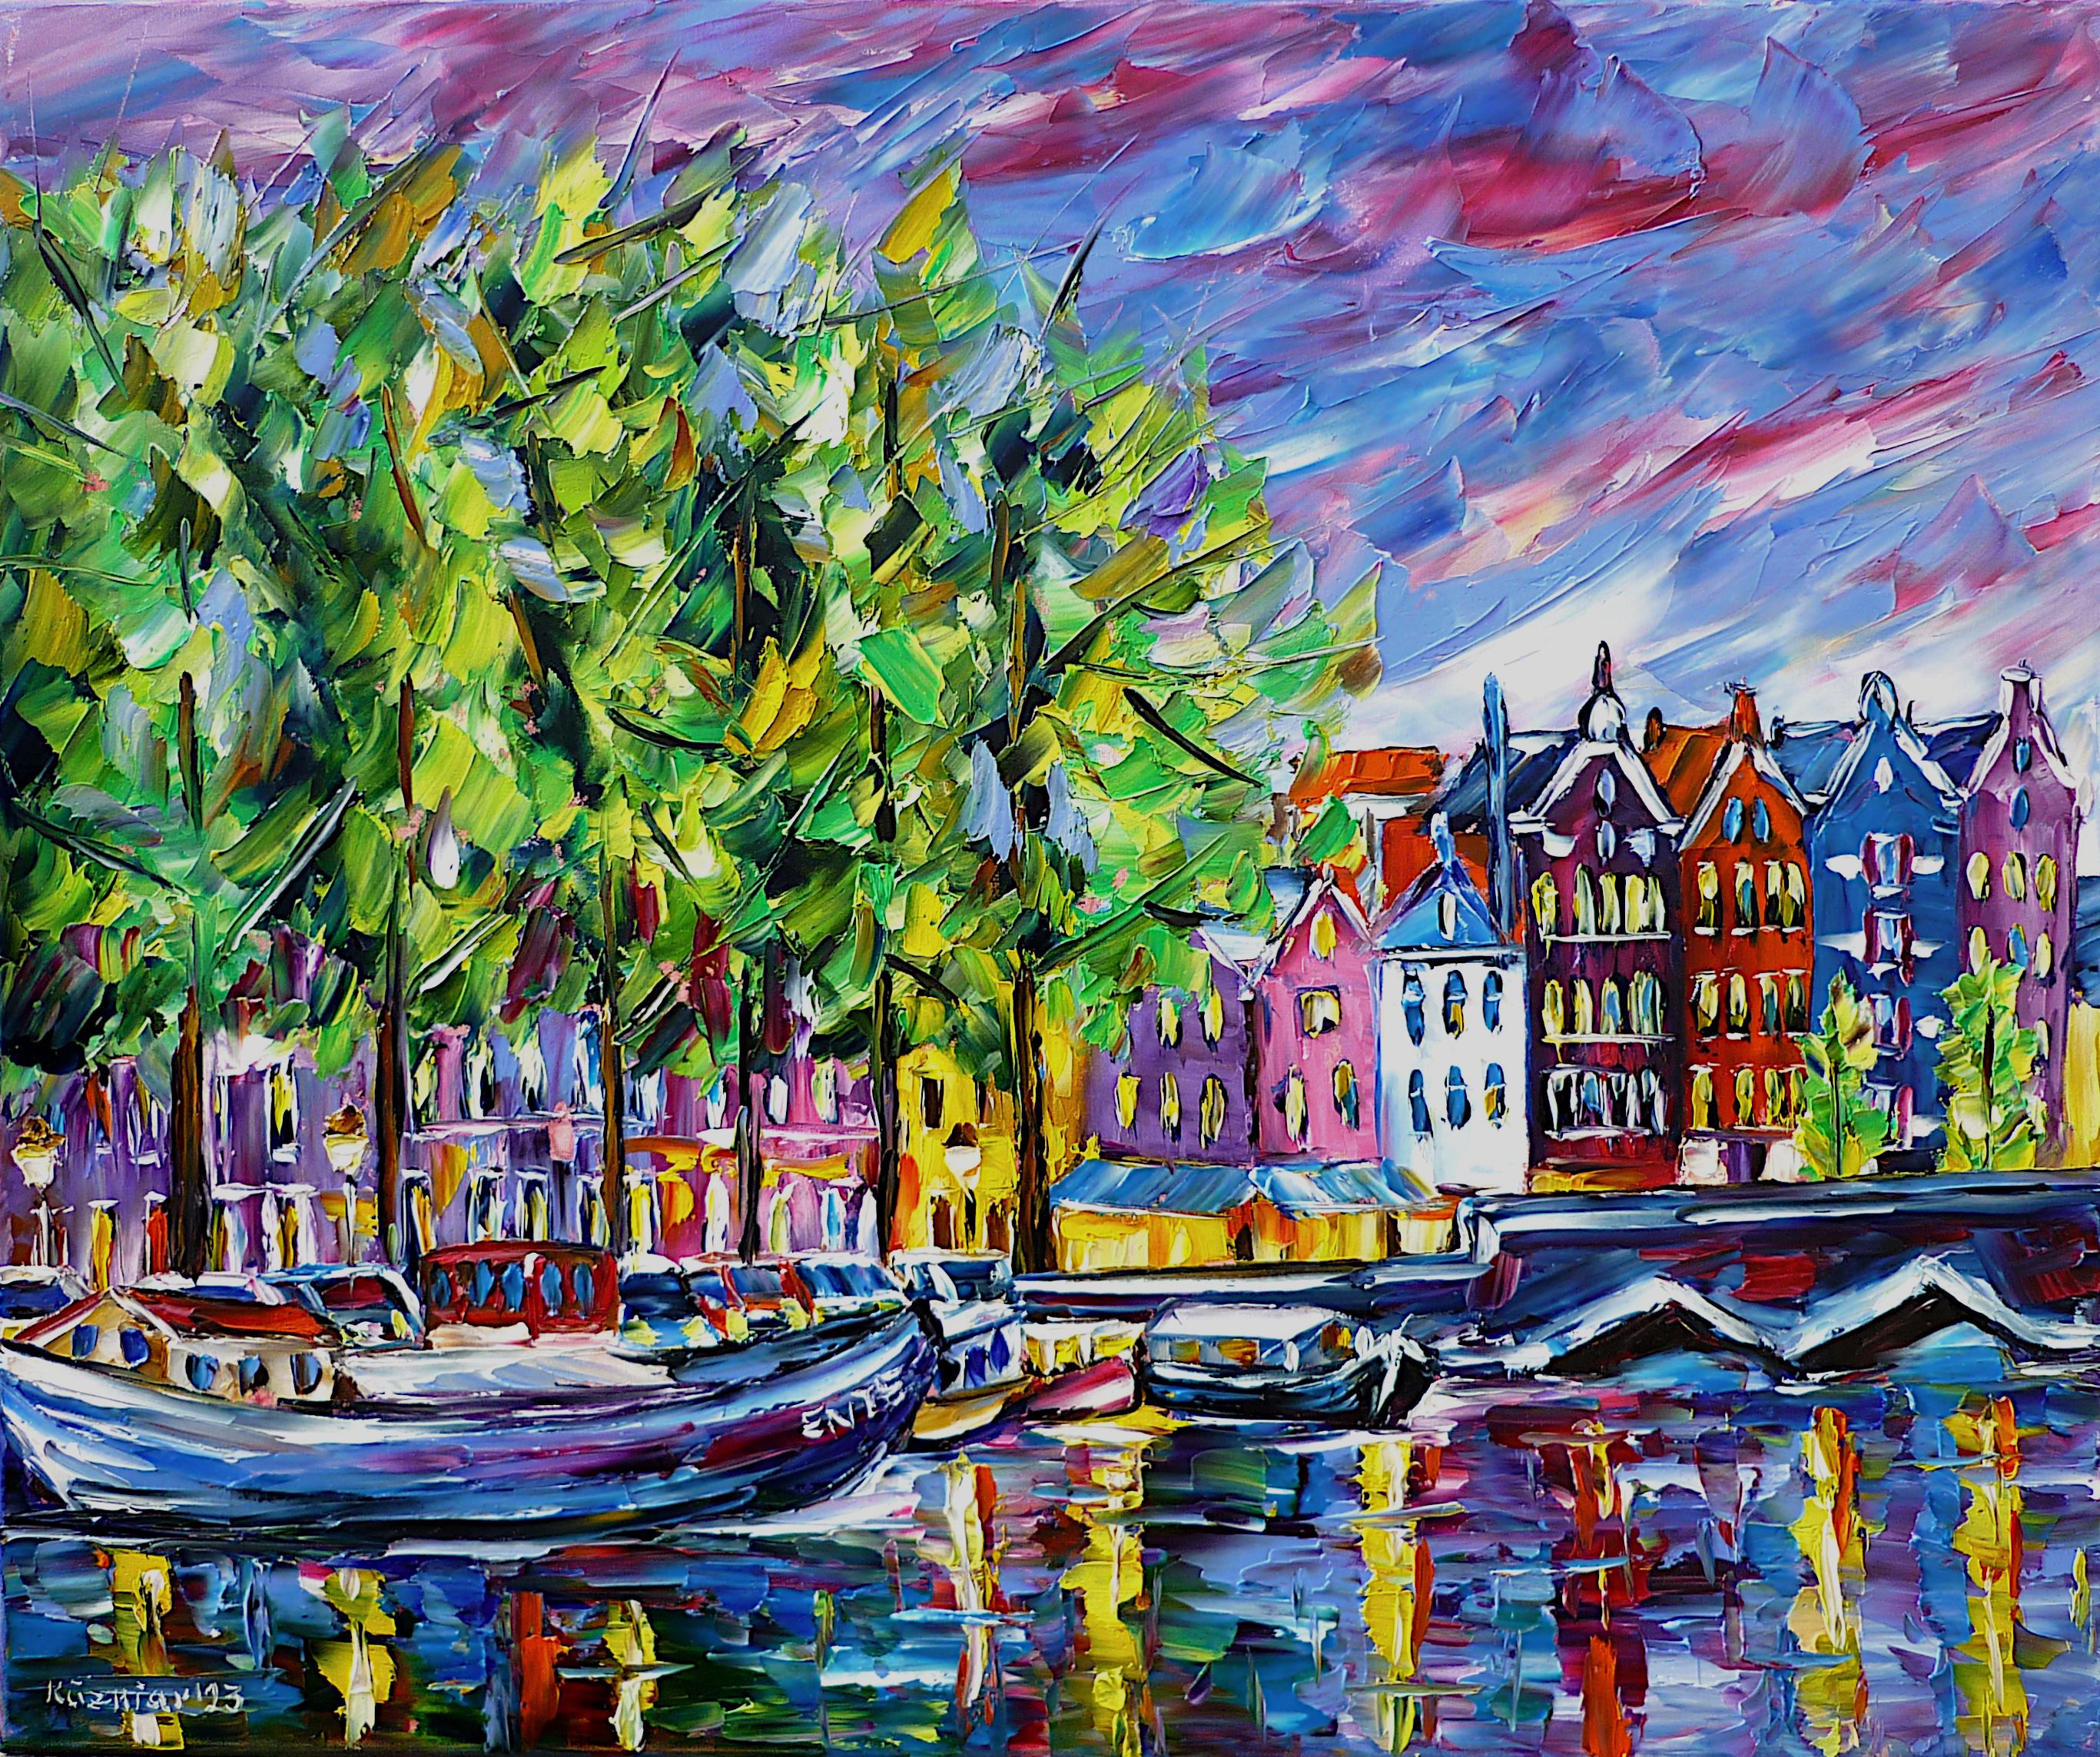 amsterdam picture,amsterdam painting,amsterdam in the evening,amsterdam art,amsterdam evening mood,amsterdam evening sky,houses of amsterdam,amsterdam water canal,amsterdam canals,amsterdam river,amsterdam bridge,boats in amsterdam,water reflections,colorful amsterdam,old amsterdam,sky over amsterdam,boats in the harbour,amsterdam cityscape,colorful houses,amsterdam beauty,amsterdam love,amsterdam lovers,i love amsterdam,beautiful city,holland,netherlands,palette knife oil painting,modern art,figurative art,figurative painting,contemporary painting,abstract painting,lively colors,colorful painting,bright colors,impasto painting